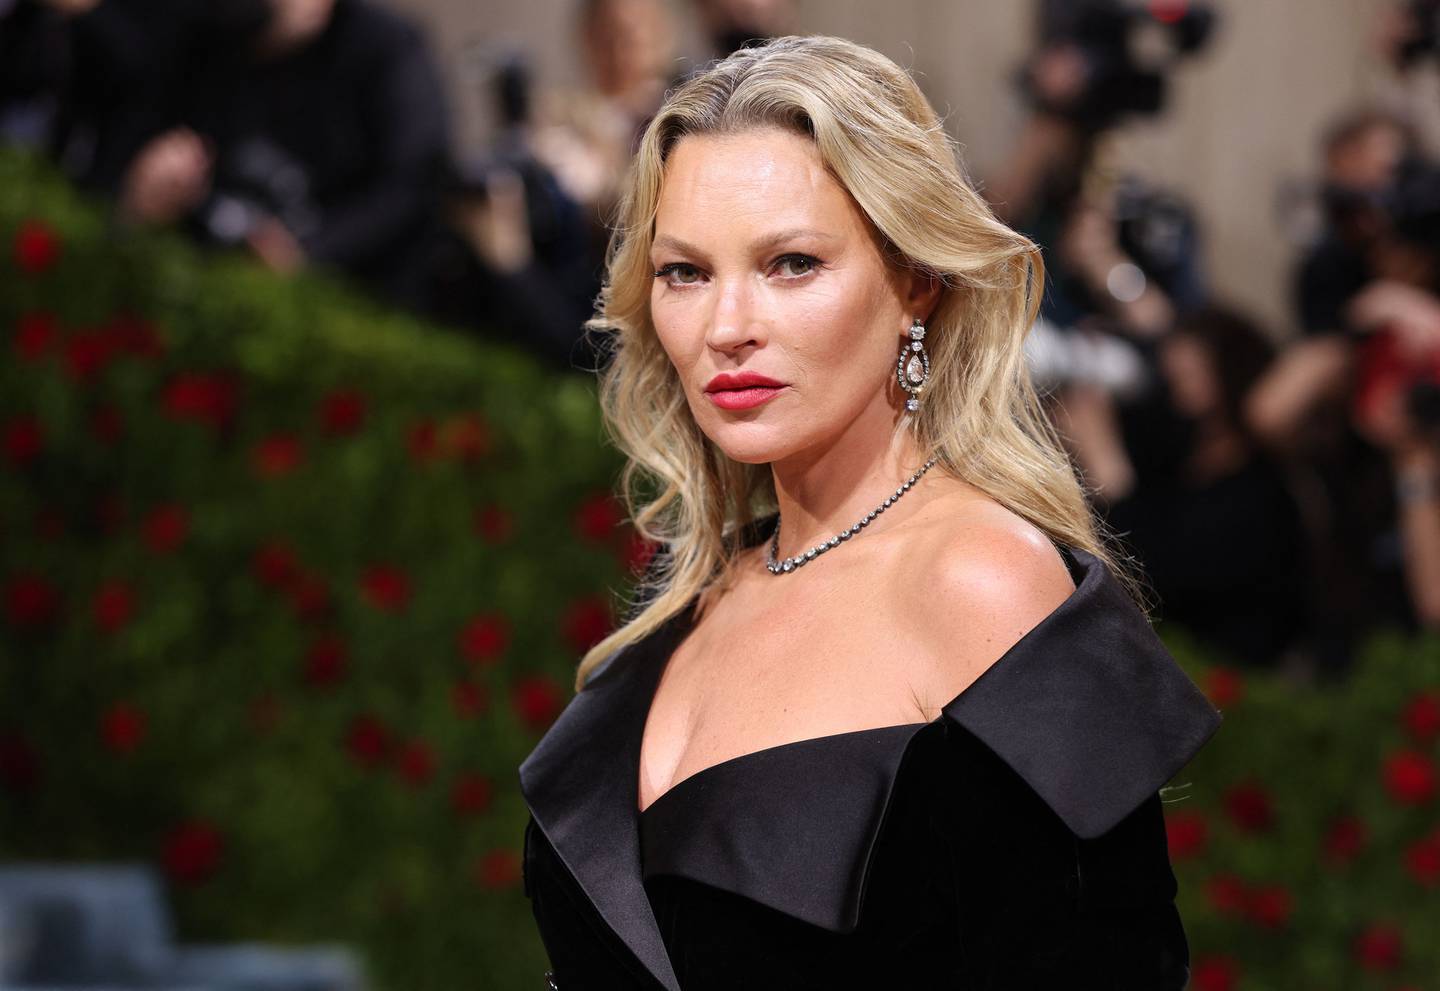 Heard mentioned British supermodel Kate Moss in court. Reuters